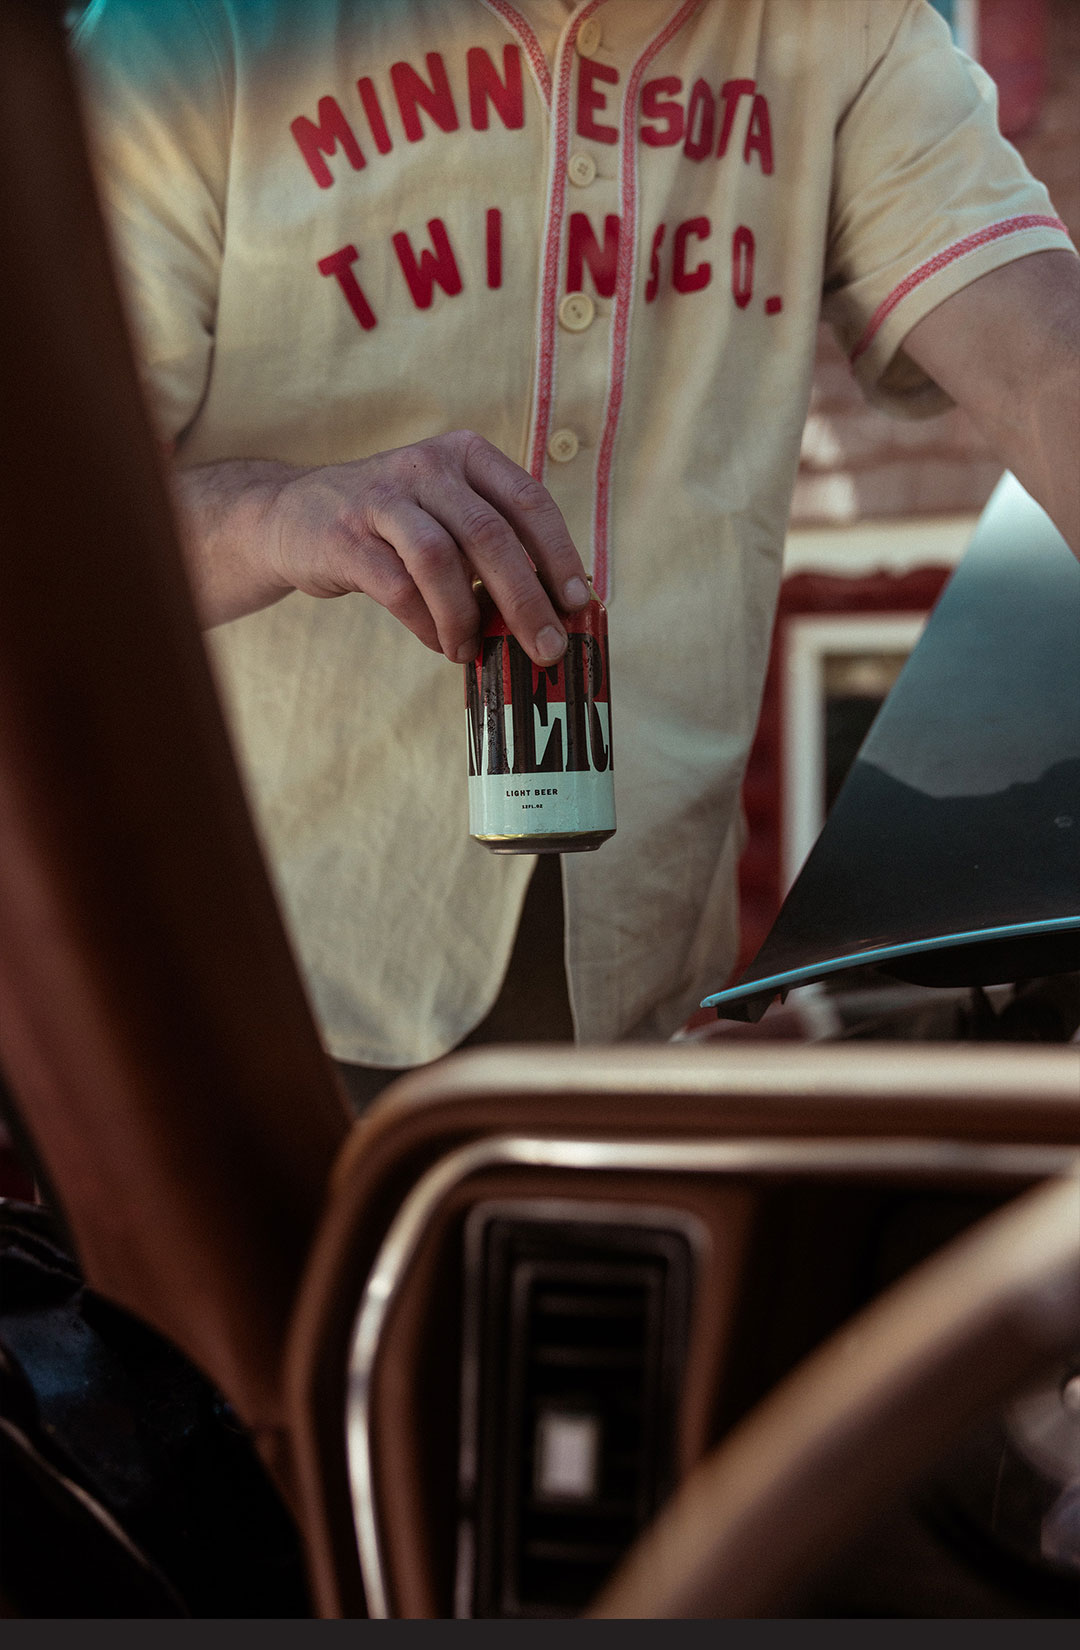 White man outside, pictured through the windscreen of a vintage car, holding a can of Merican beer, wearing a cream-colored Minnesota Twins shirt.